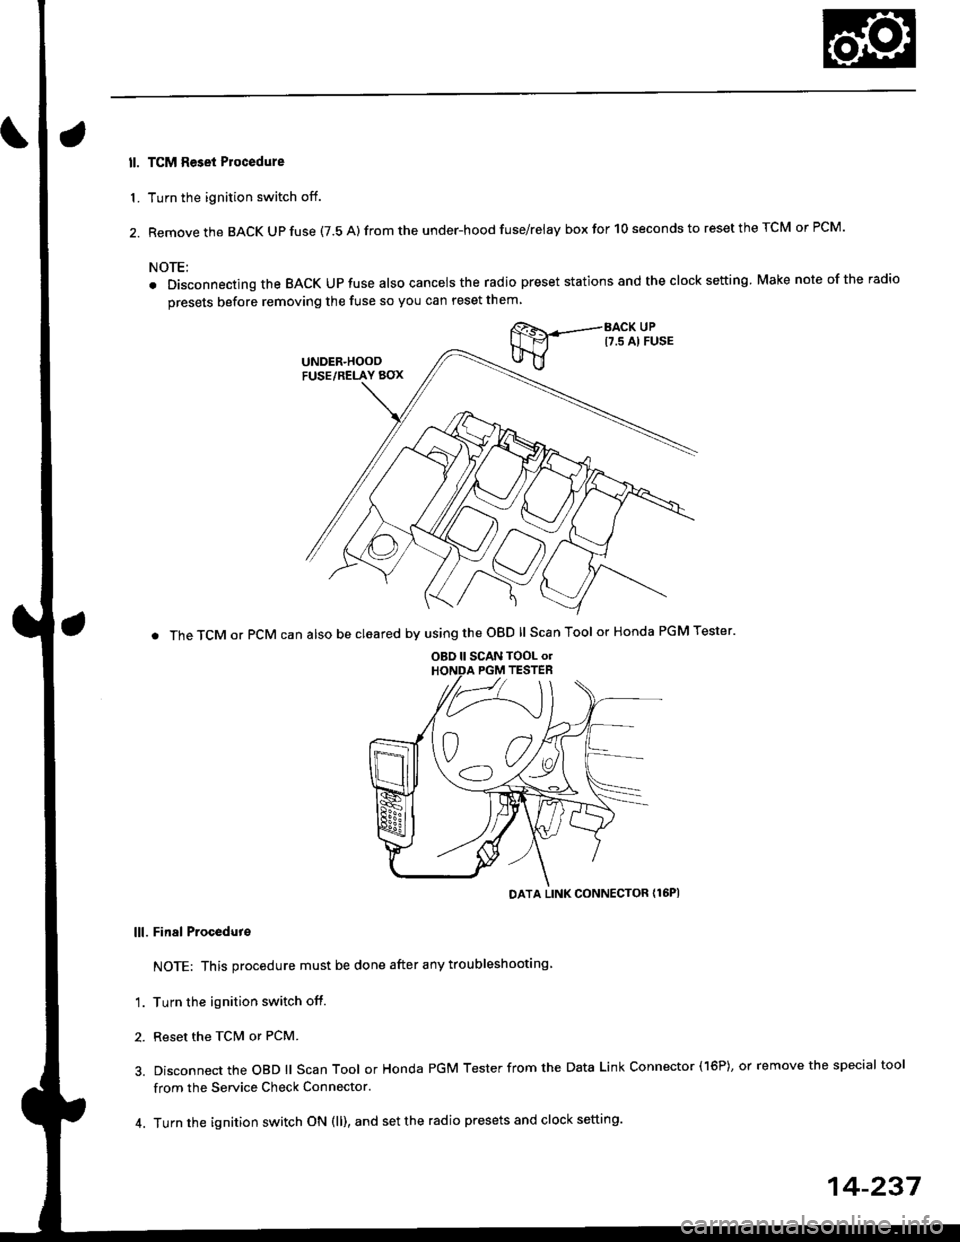 HONDA CIVIC 1996 6.G Owners Guide ll. TCM Reset Plocedure
1. Turn the ignition switch off.
2. Remove the BACK Up fuse (7.5 A) from the under-hood fuse/relay box for 10 seconds to reset the TCM or PCM.
NOTE:
. Disconnecting the BACK UP